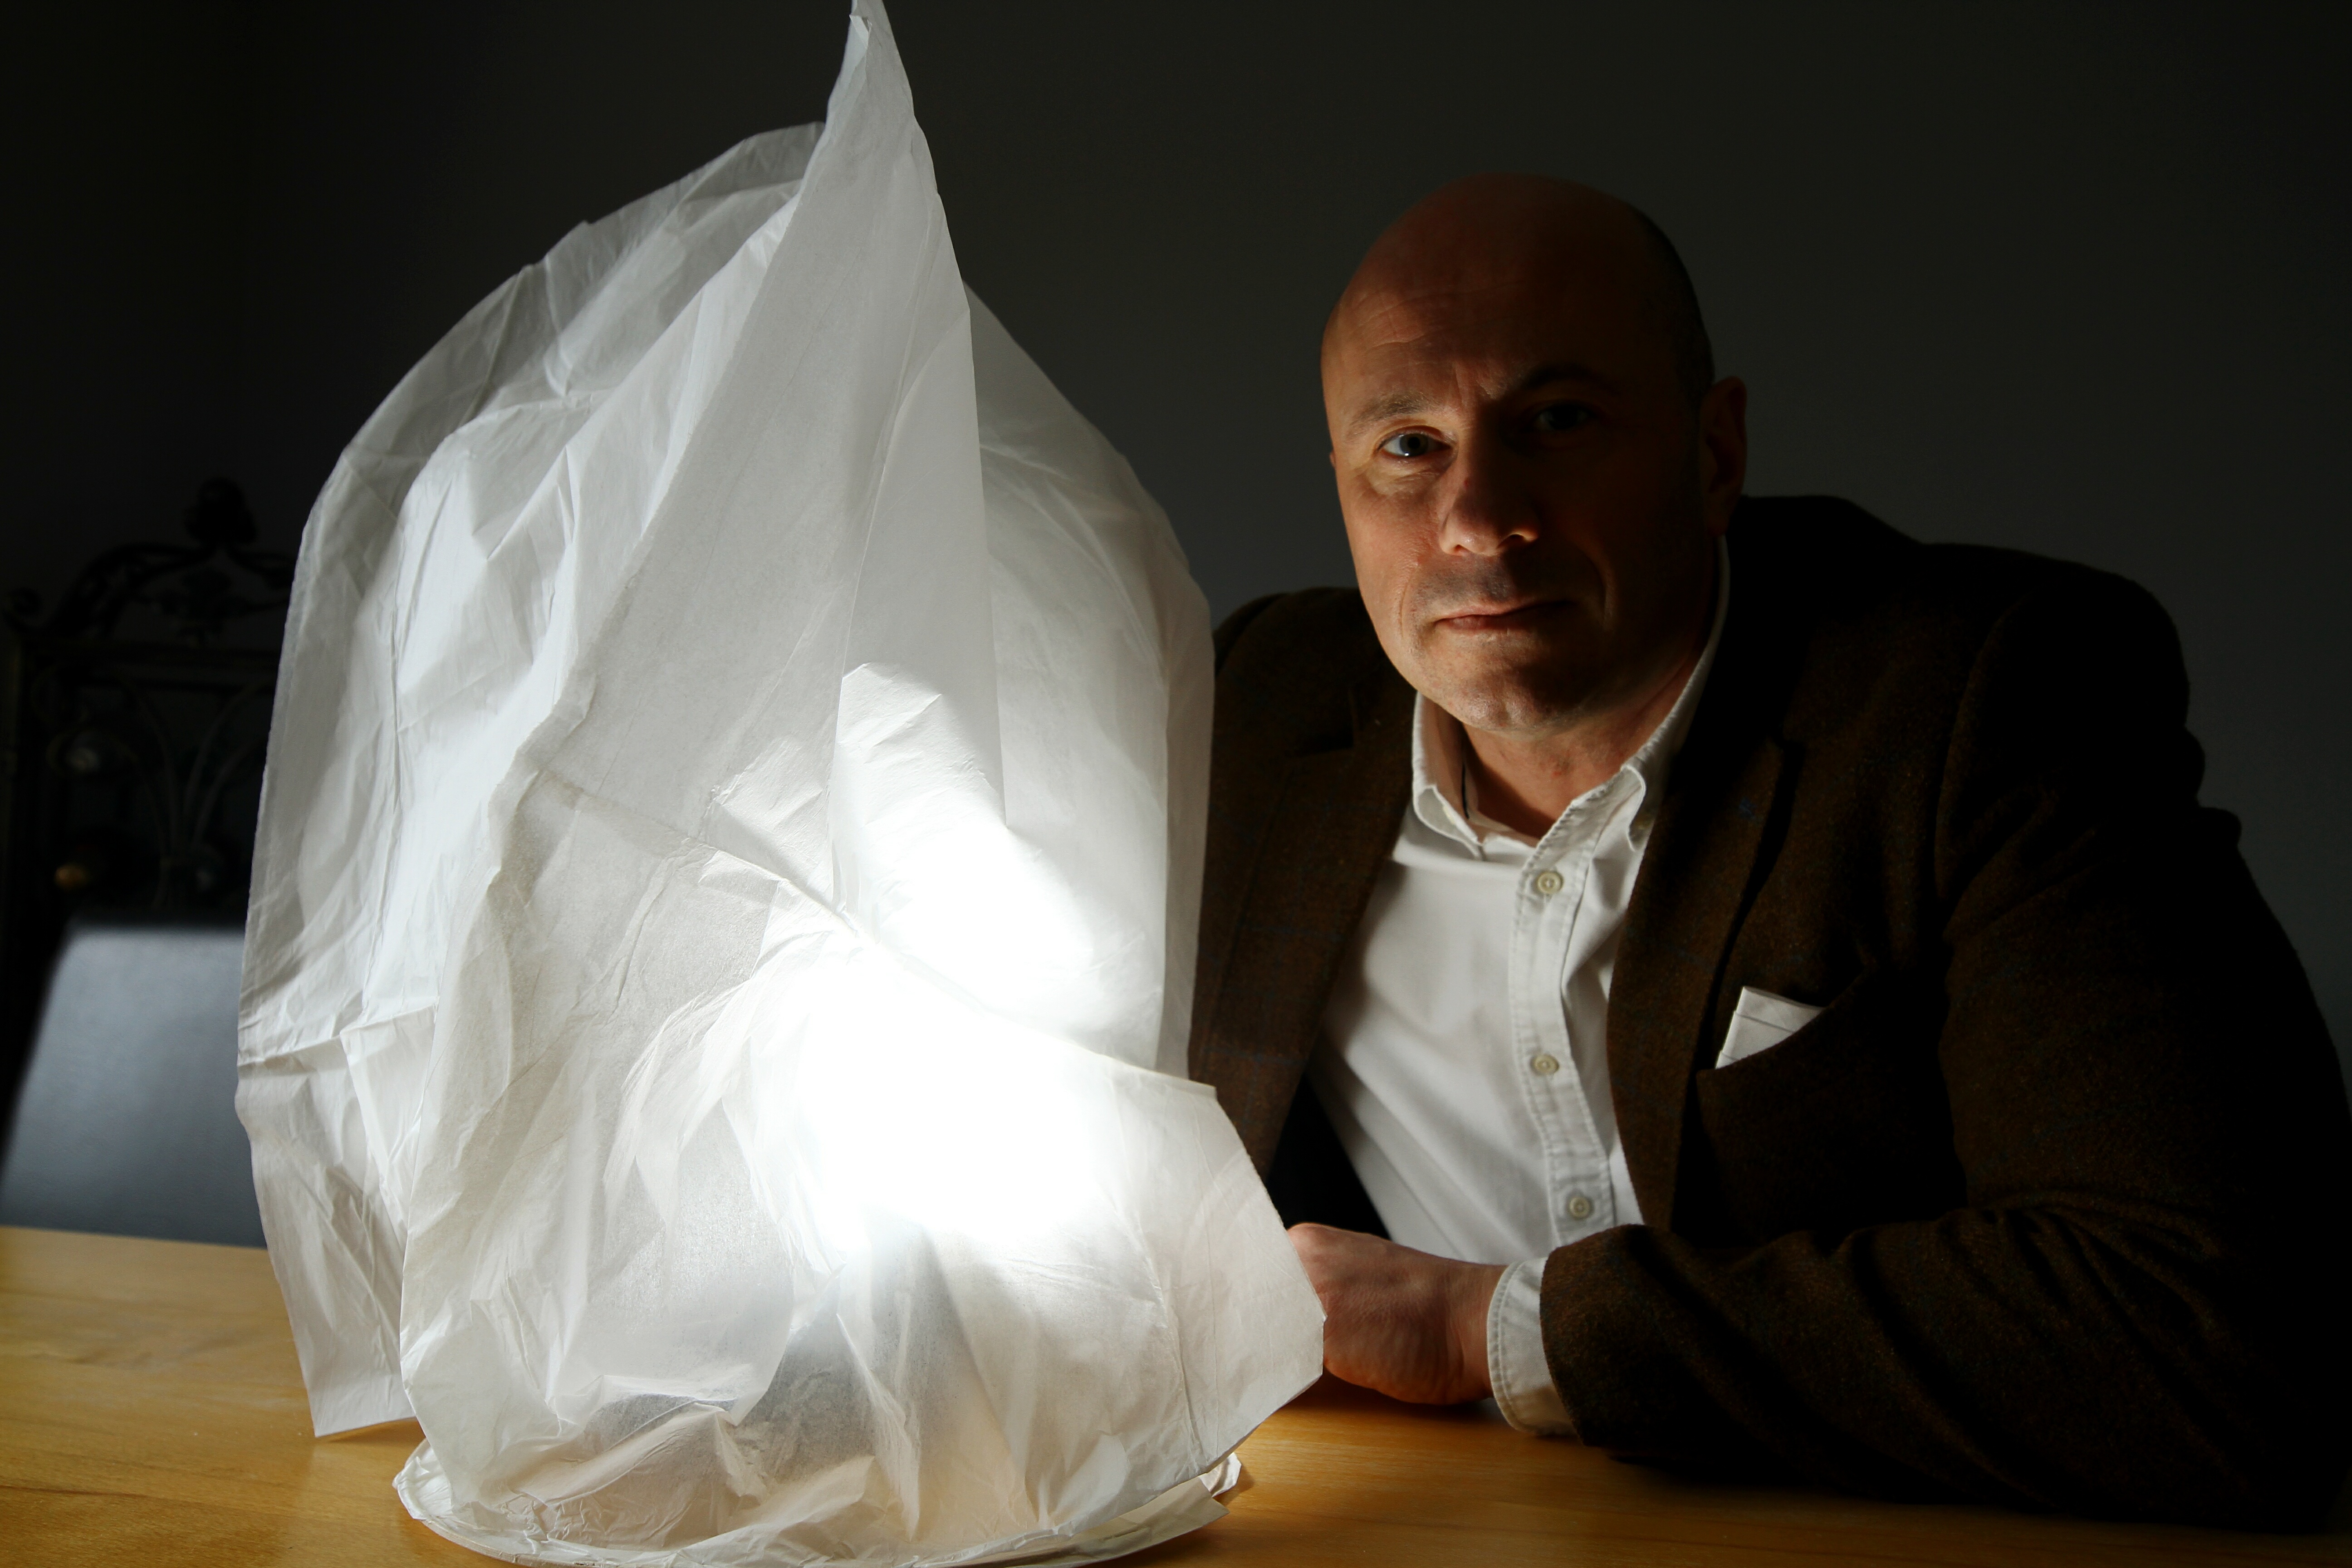 Derek Wann is warning about the dangers posed by Chinese lanterns.